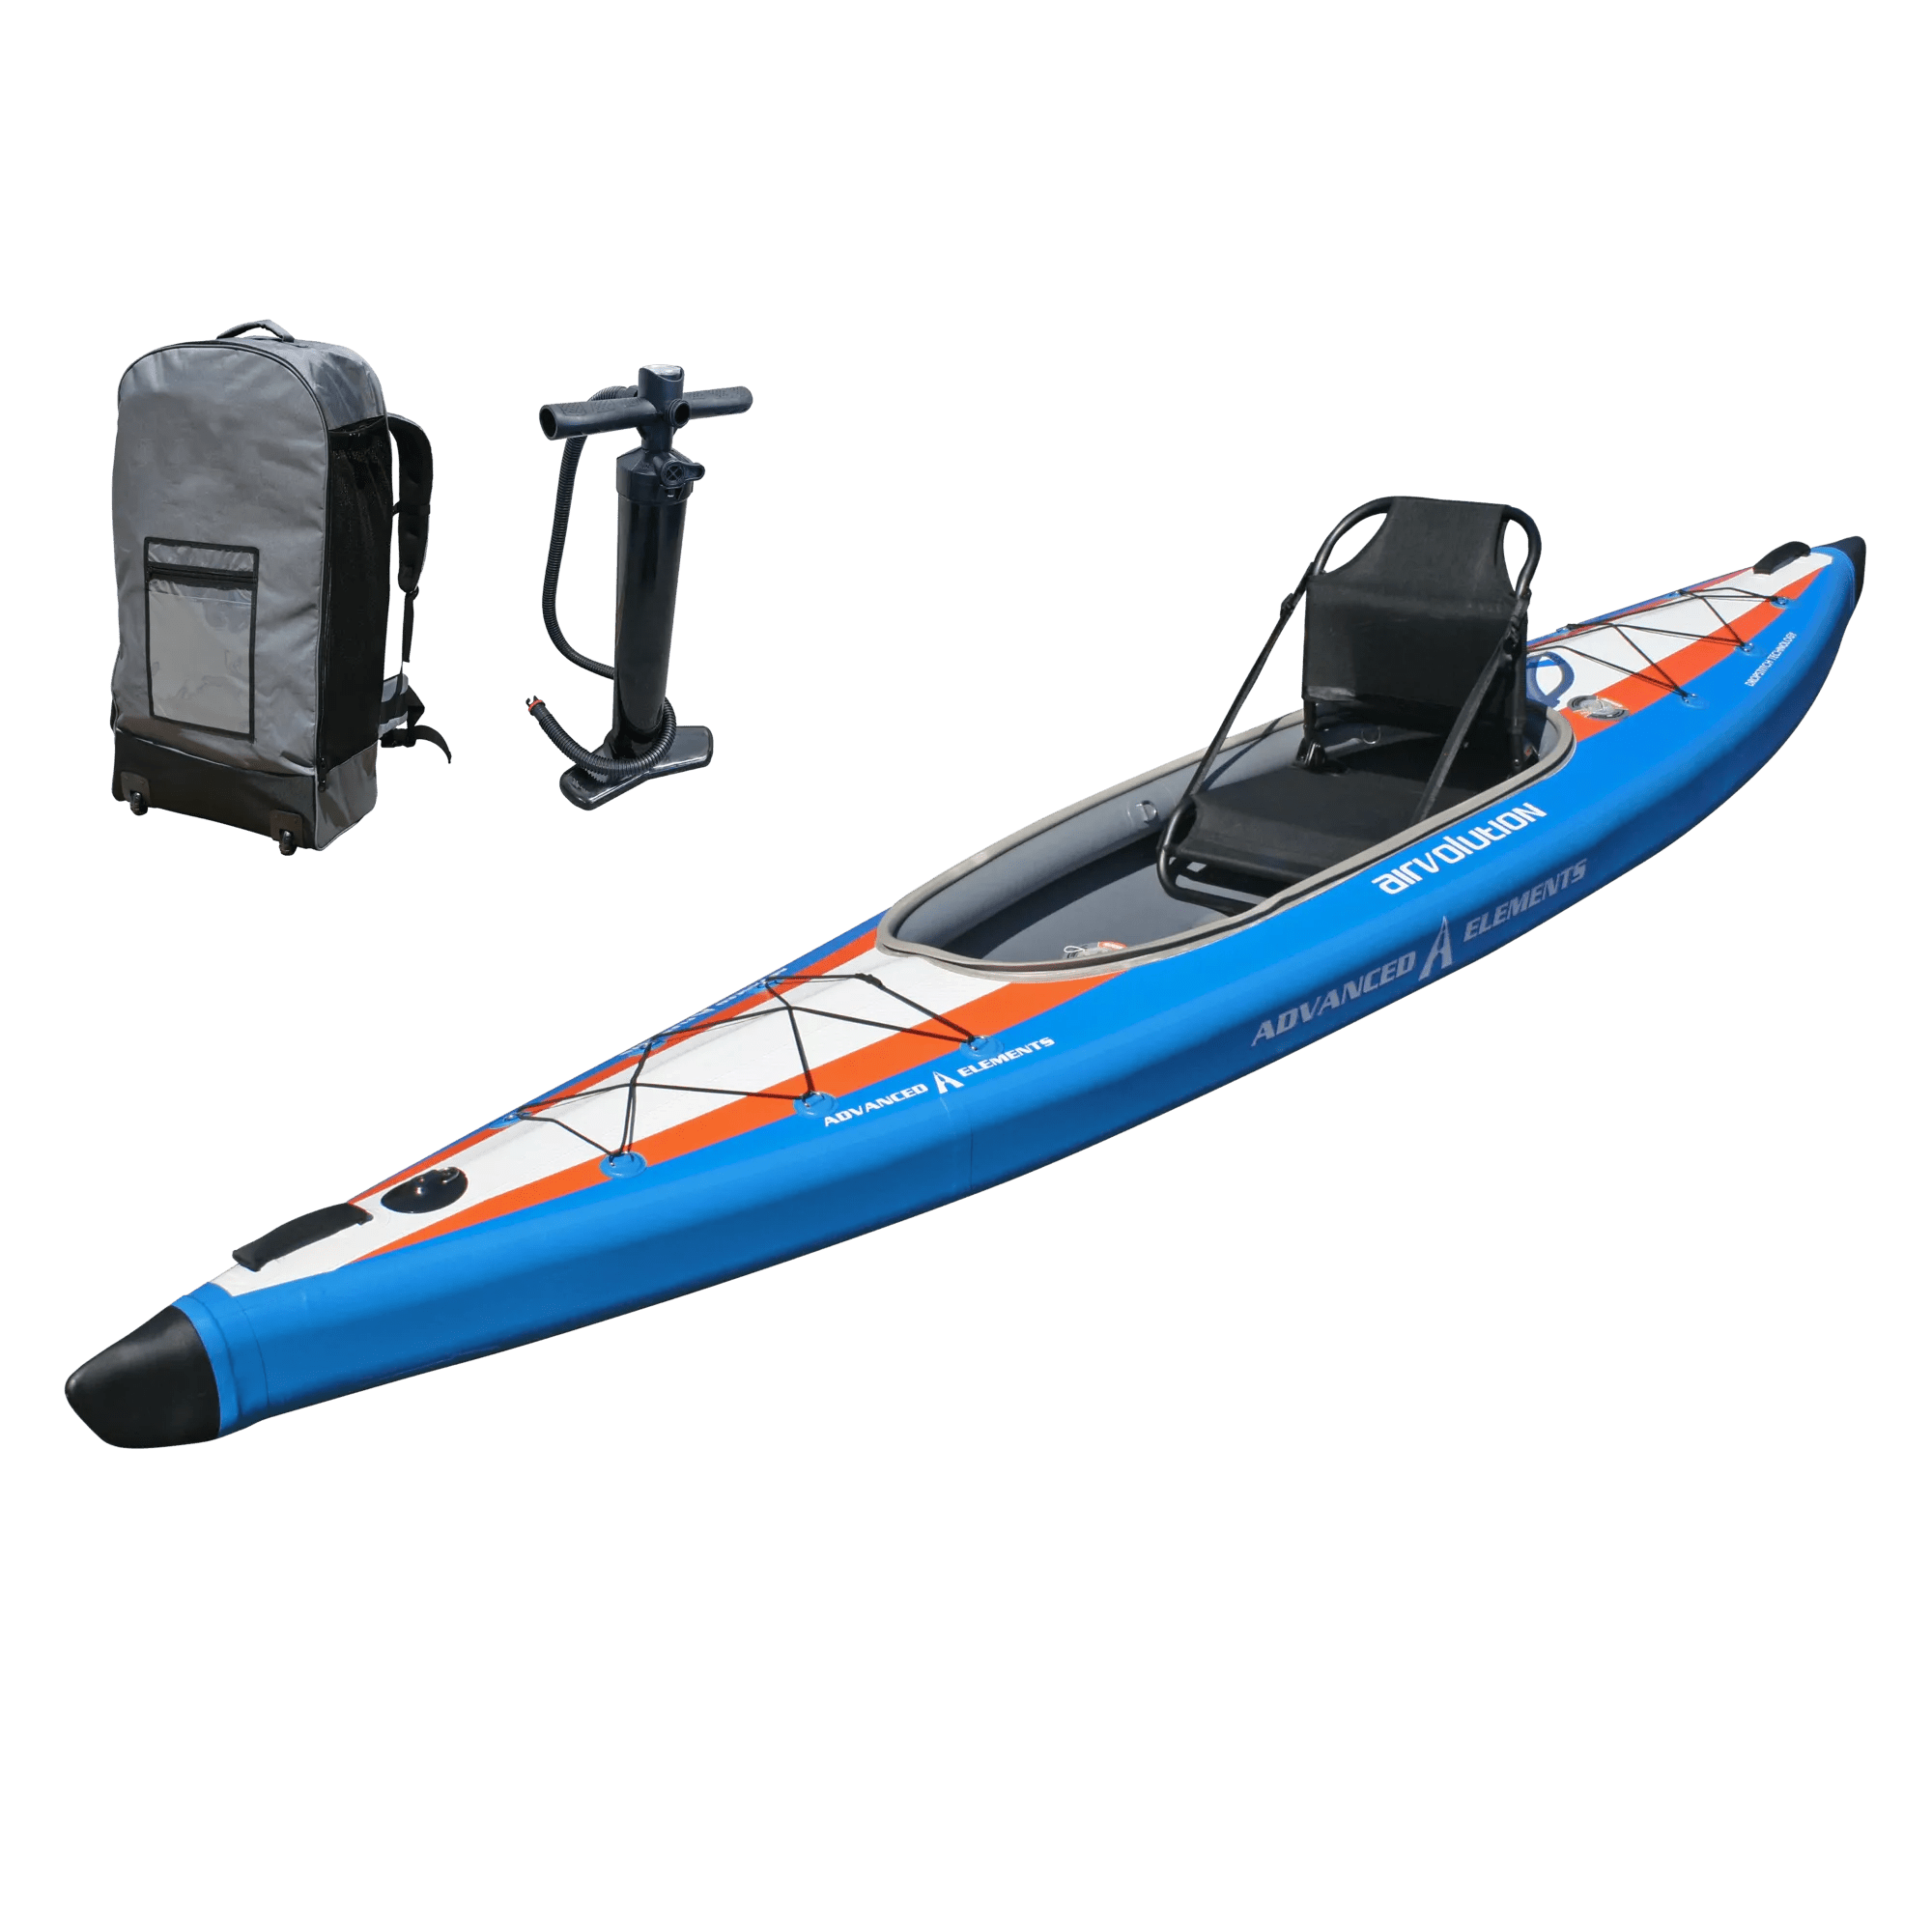 ADVANCED ELEMENTS - AirVolution™ Pro Recreational Kayak with Pump -  - AE3029-O - 